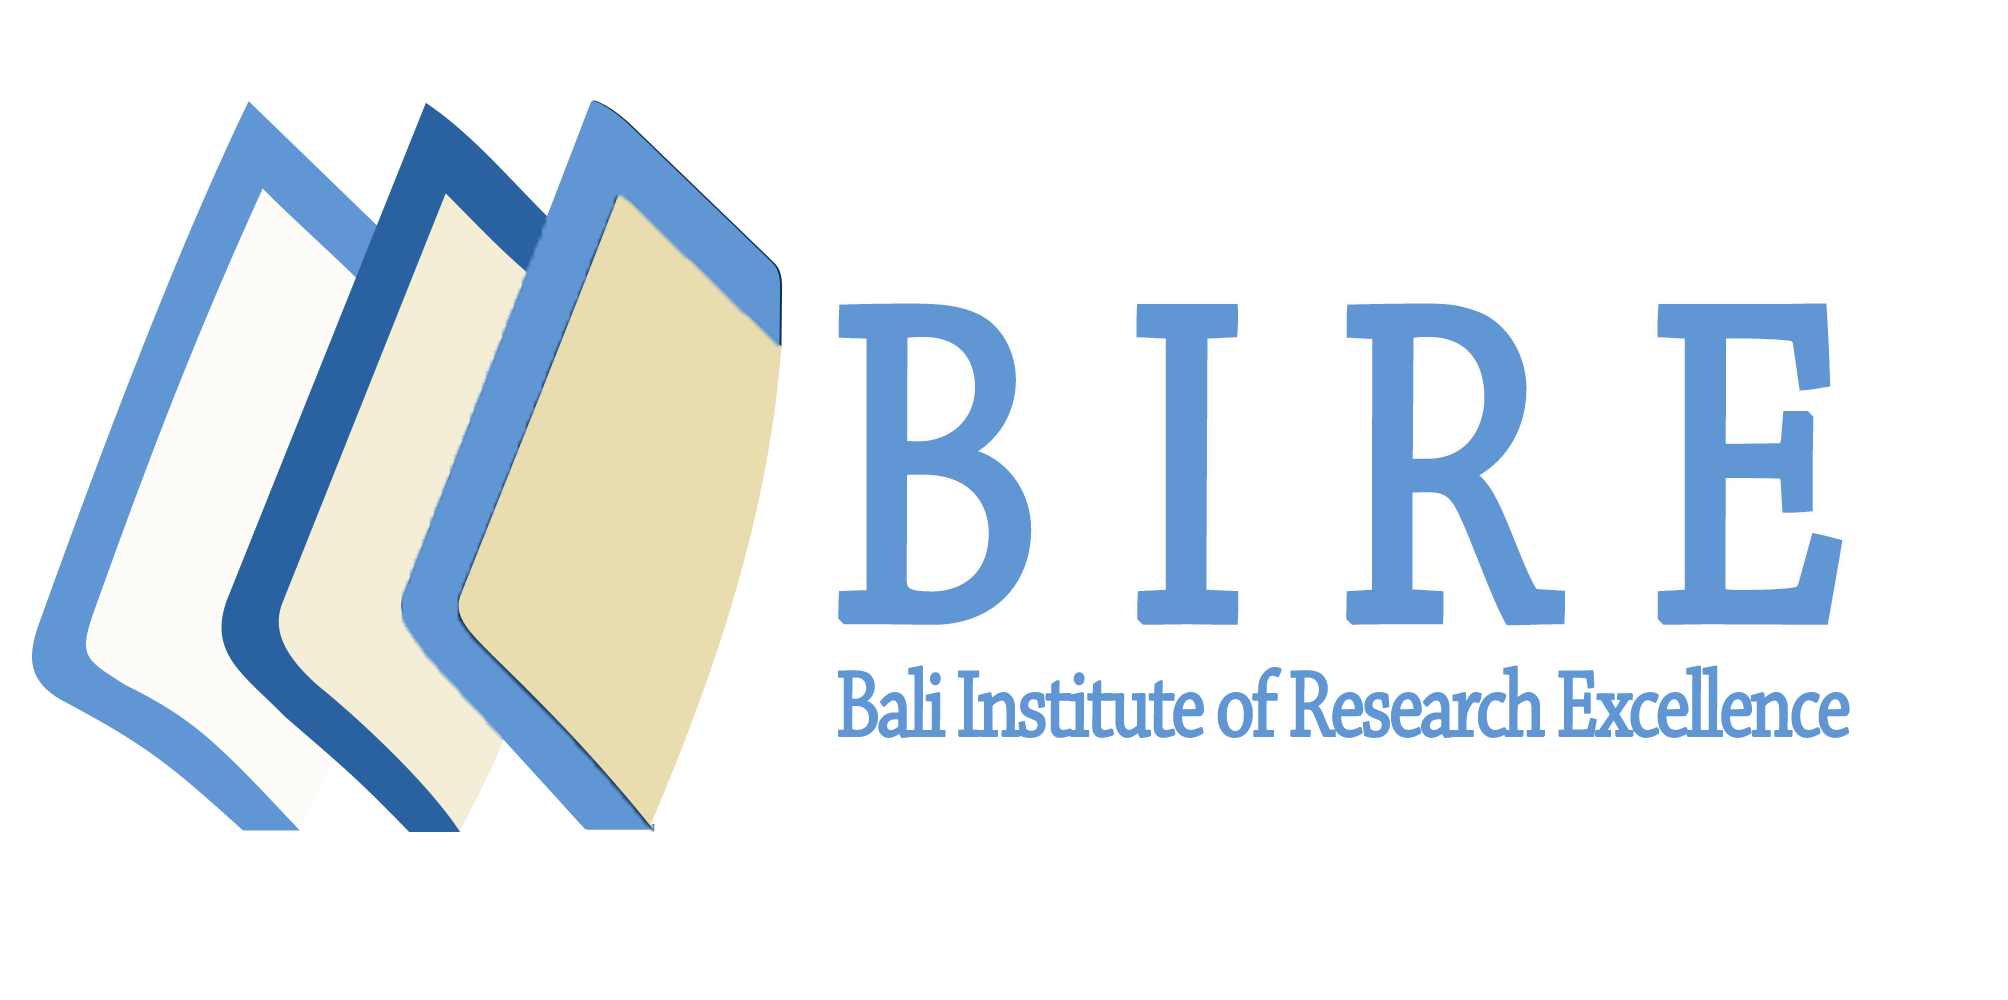 RBSEIT-2022 2022 International Conference on Current Research in Business Management, Social Sciences, Economics and Information Technology, Online Event